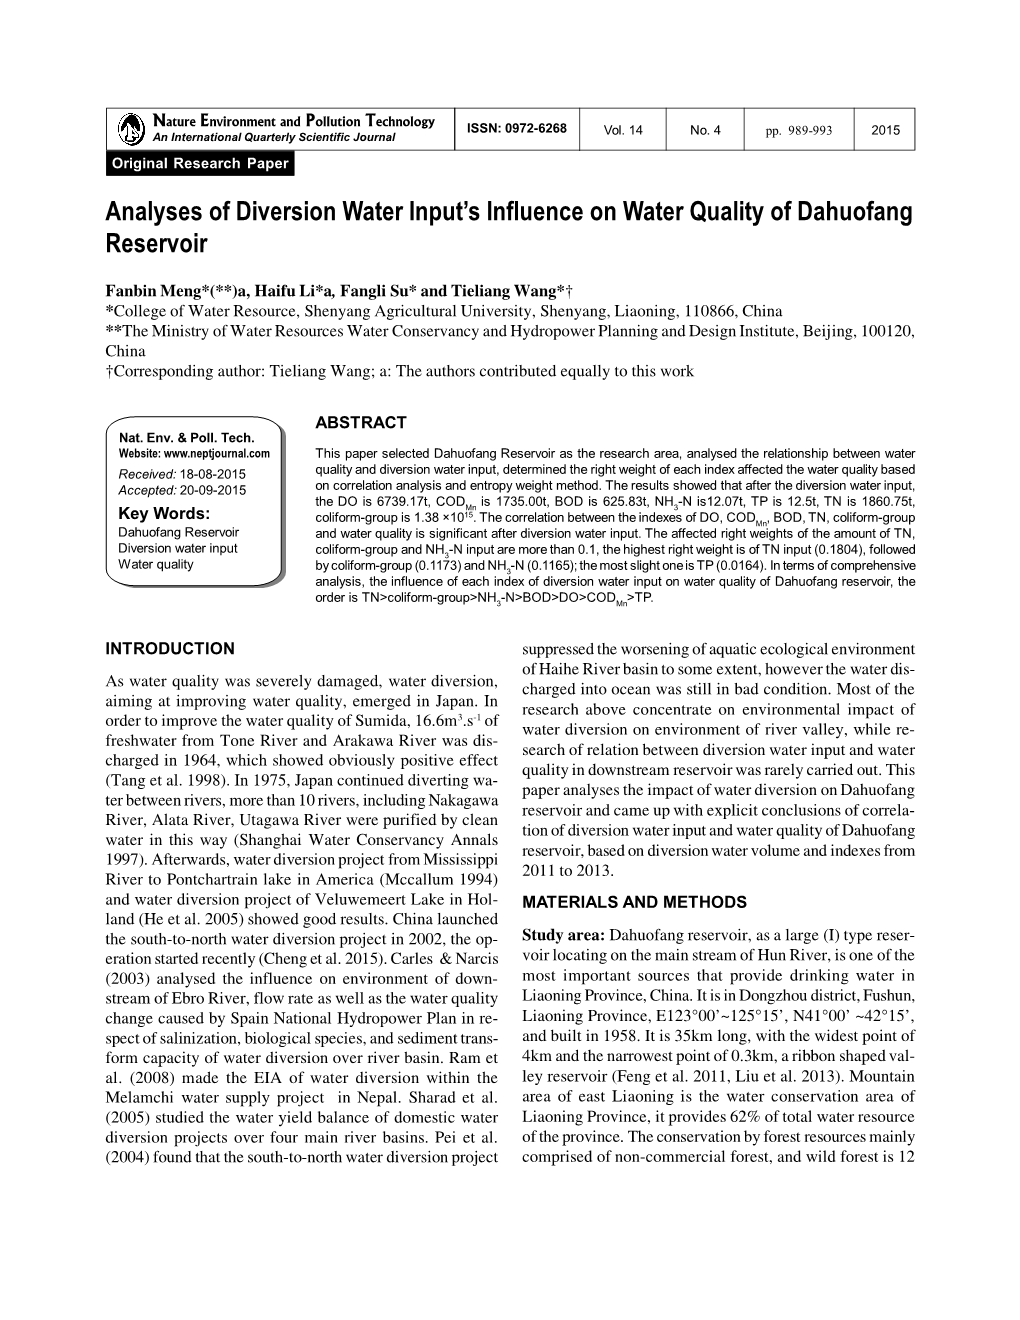 Analyses of Diversion Water Input's Influence on Water Quality Of